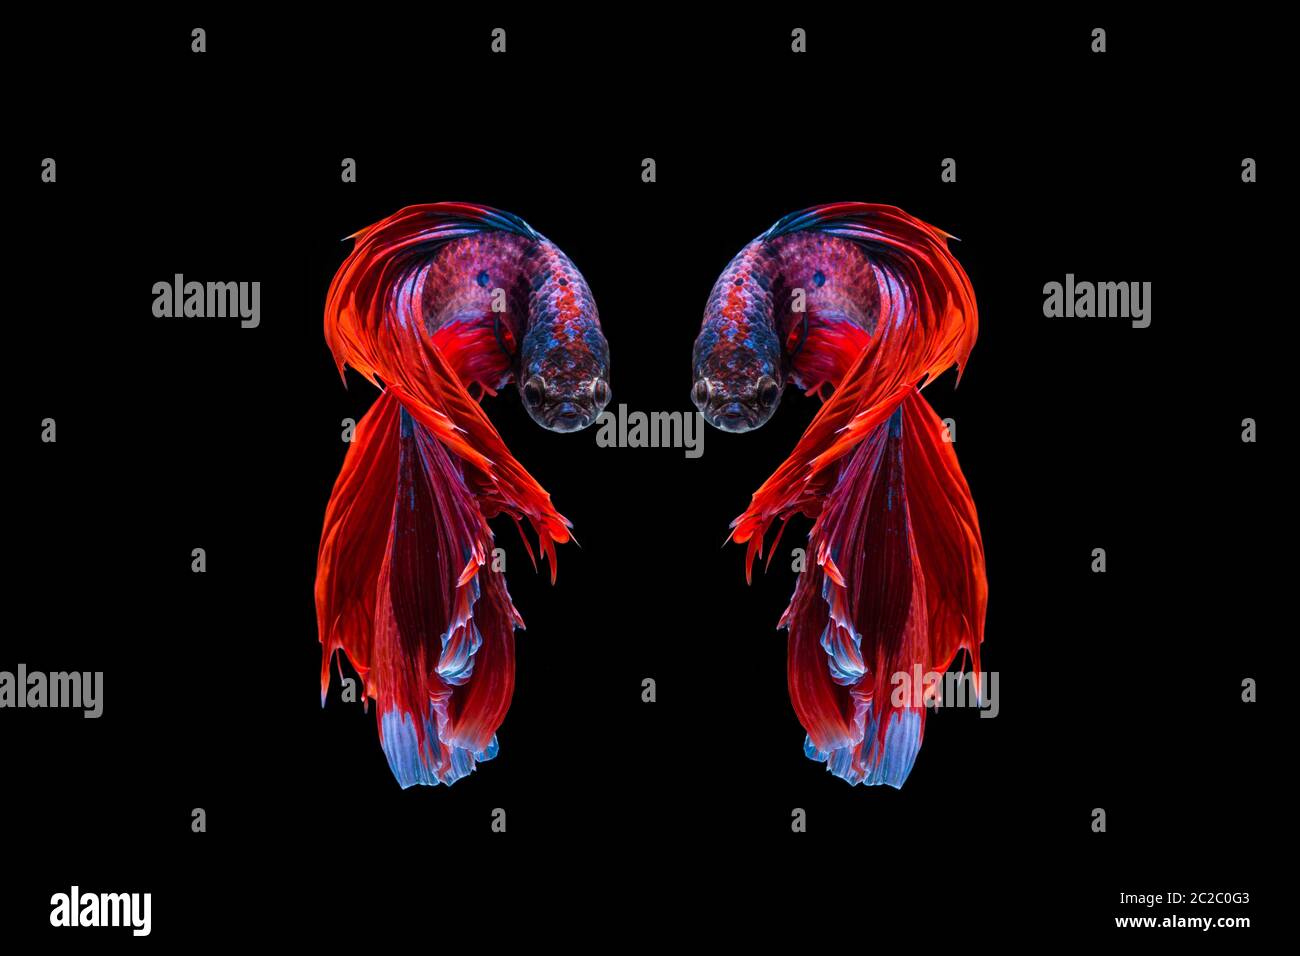 Red and blue betta fish, siamese fighting fish on black background Stock Photo